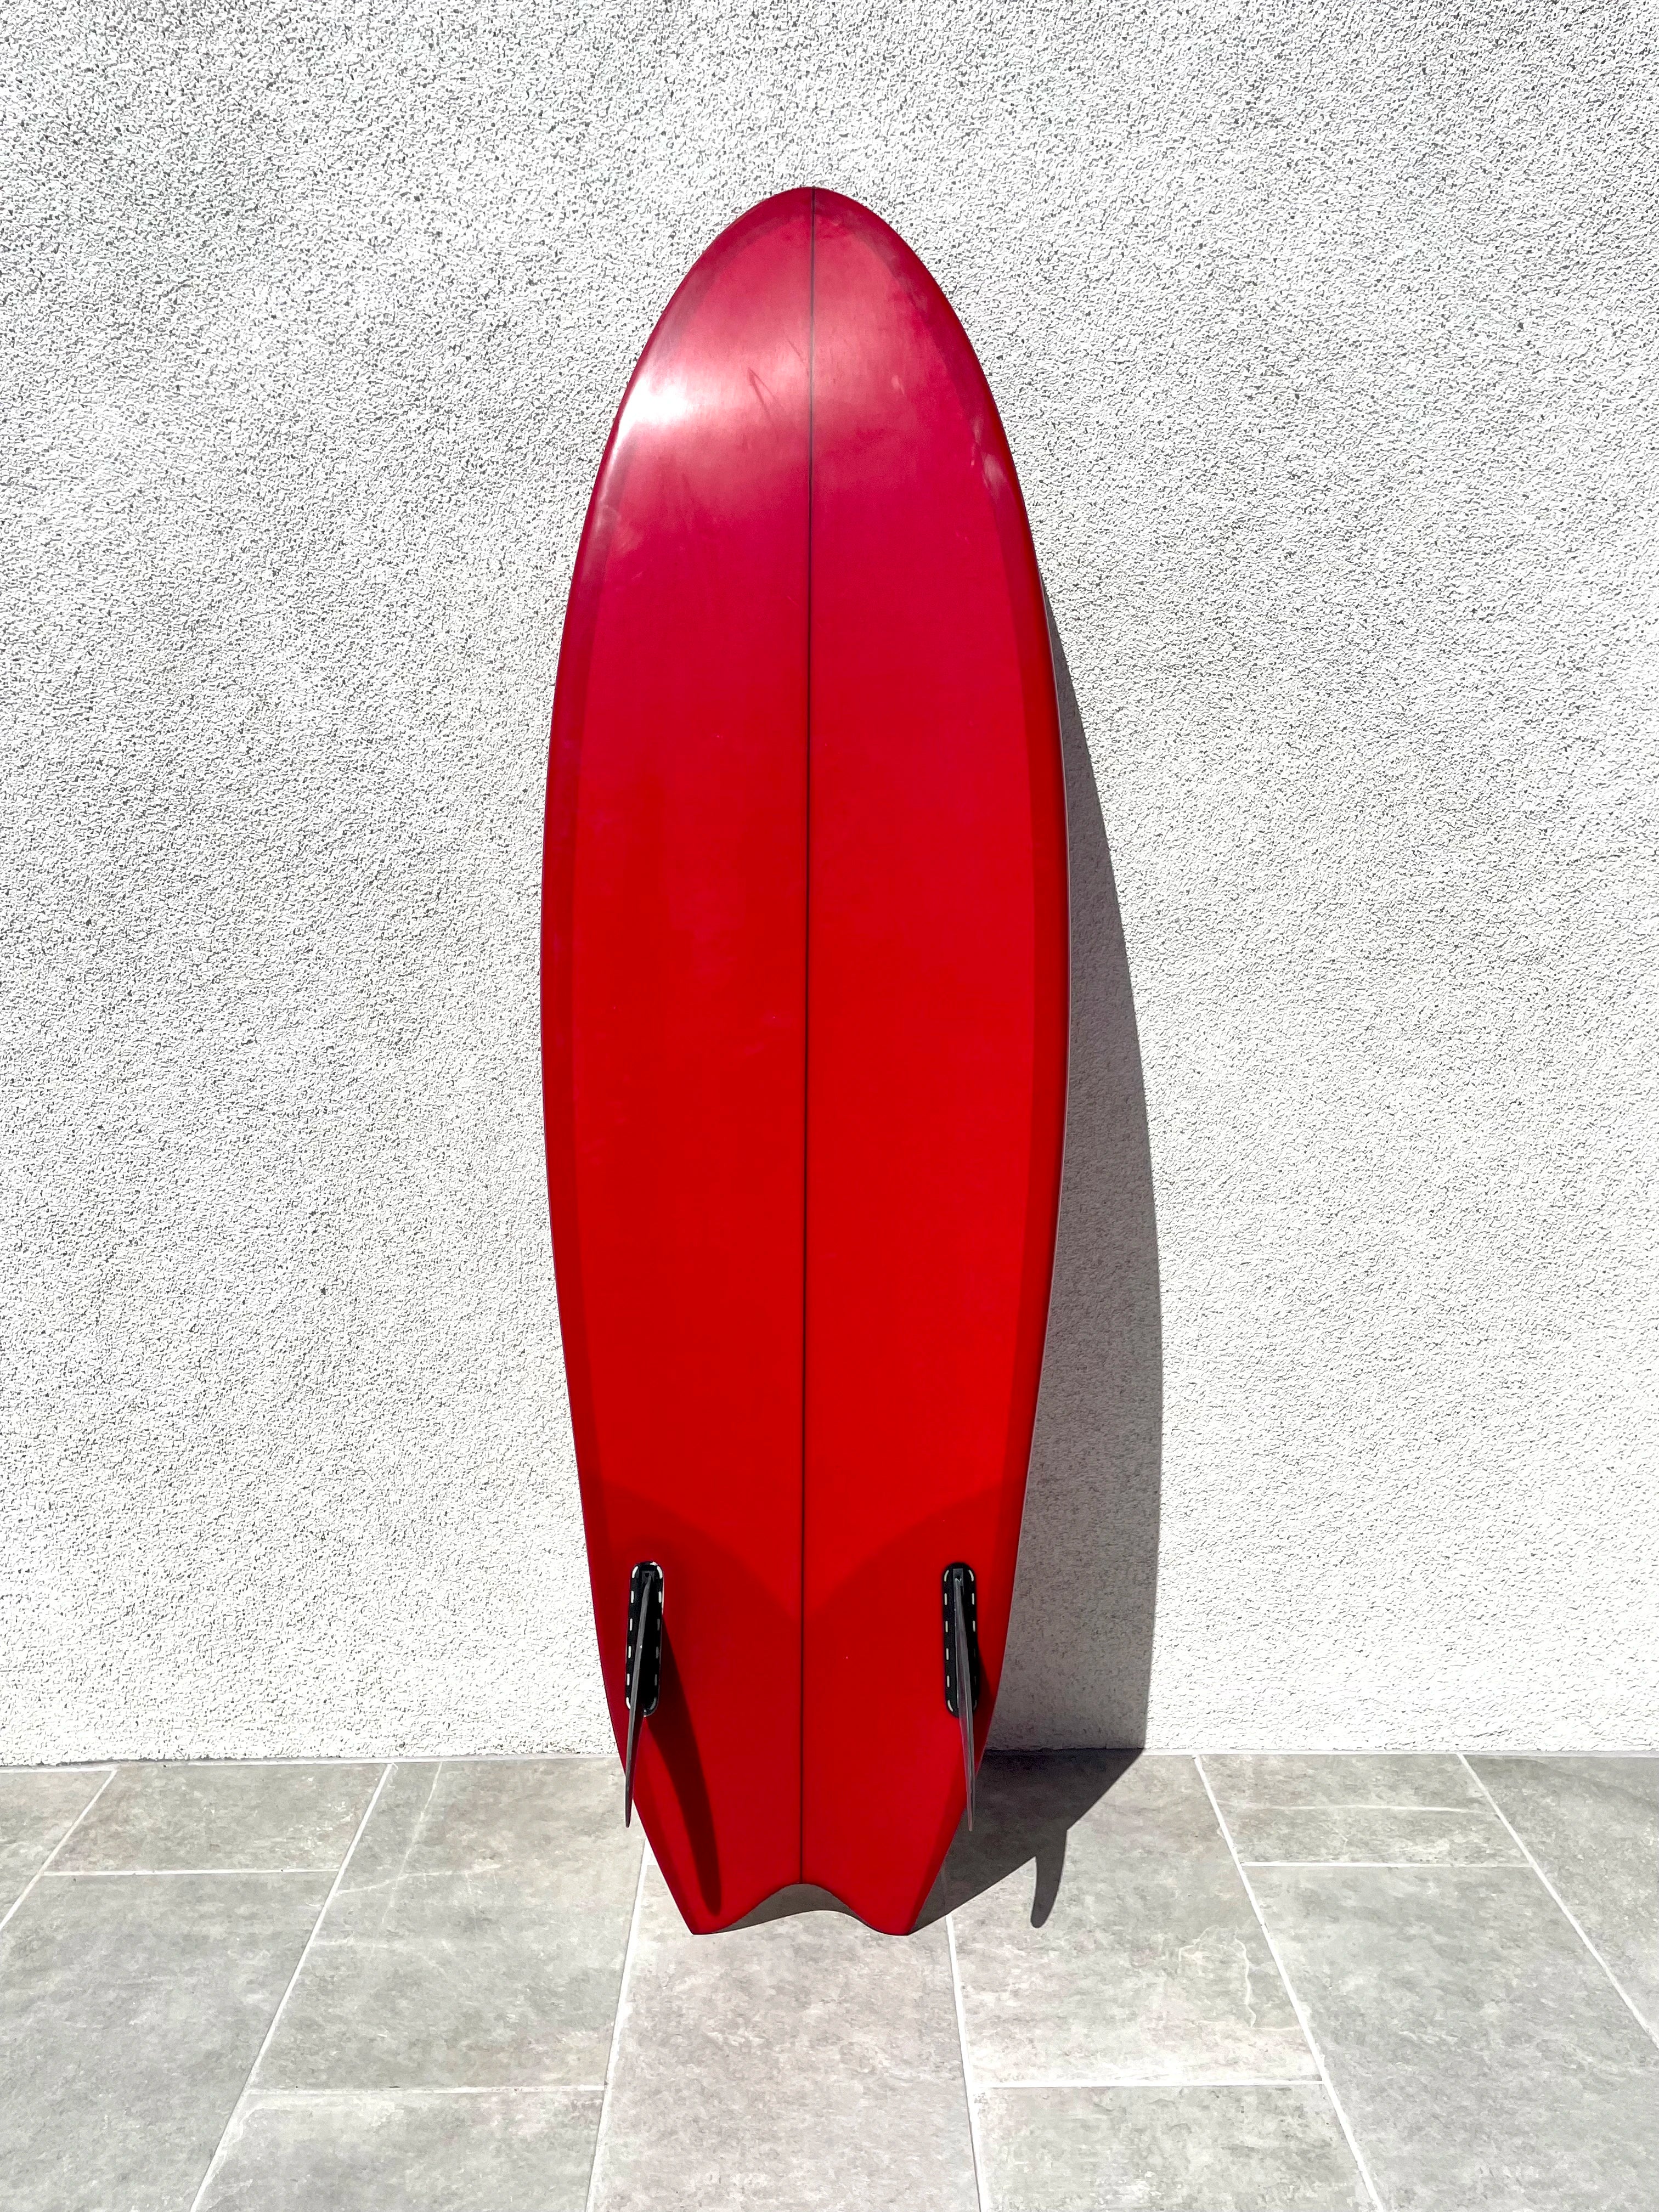 Ryan Burch | 5’7” Cuttle Fish Red Surfboard (USED)